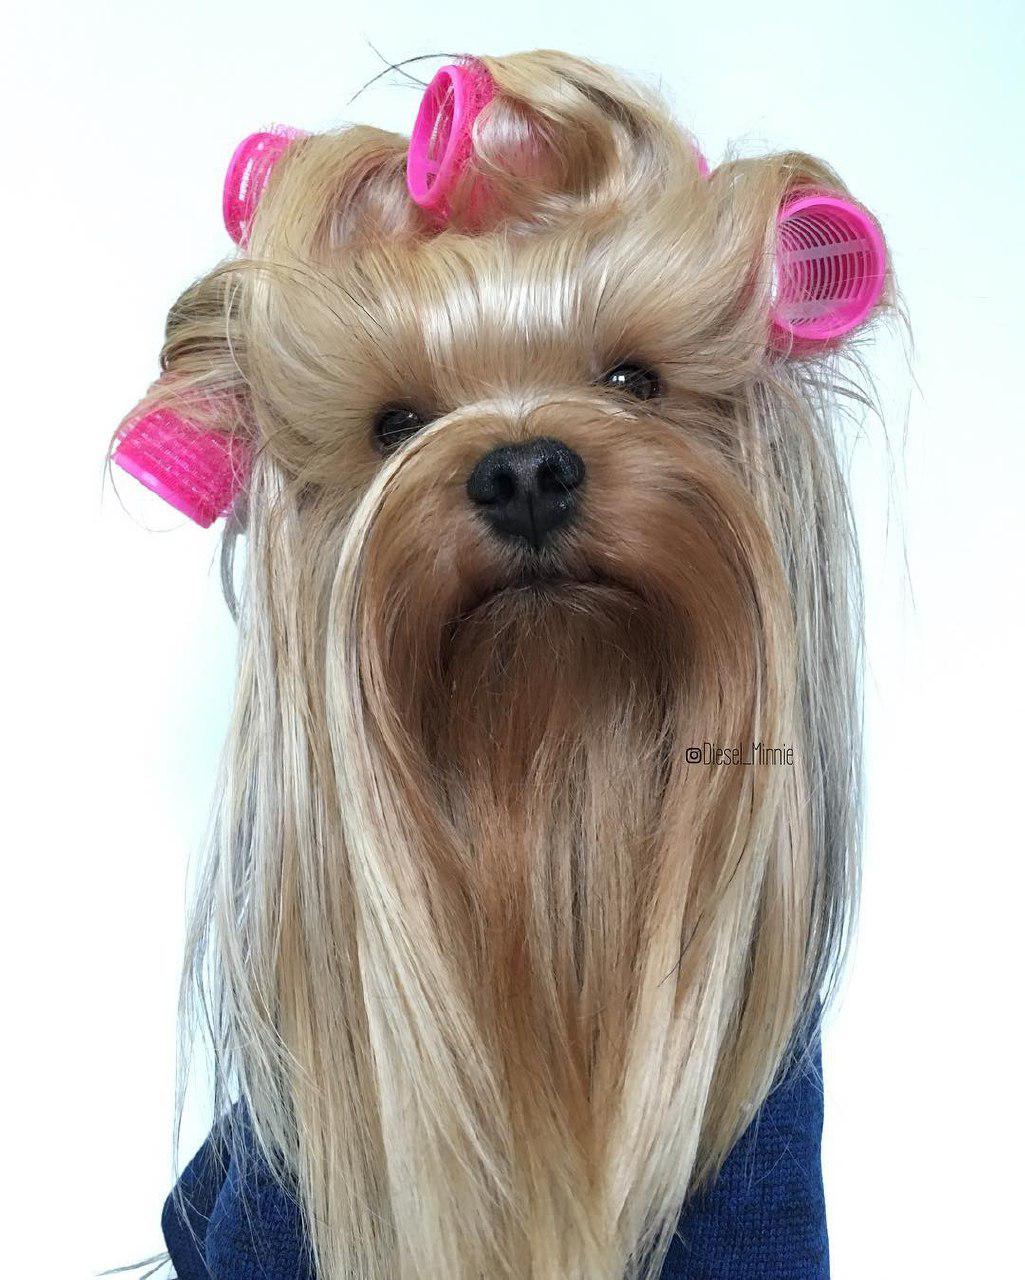 A Yorkshire Terrier with long hair wearing pink curlers